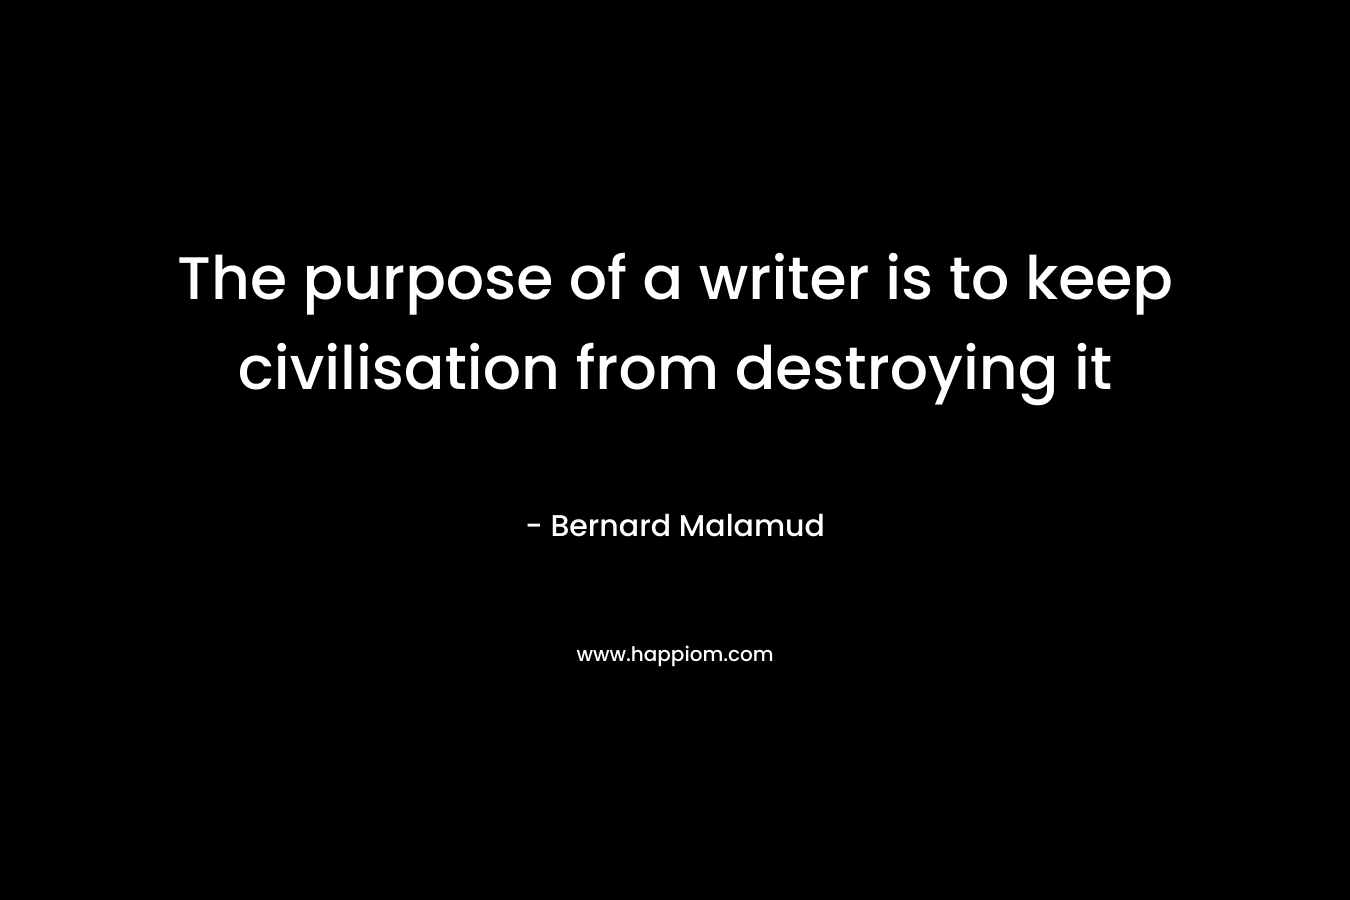 The purpose of a writer is to keep civilisation from destroying it – Bernard Malamud